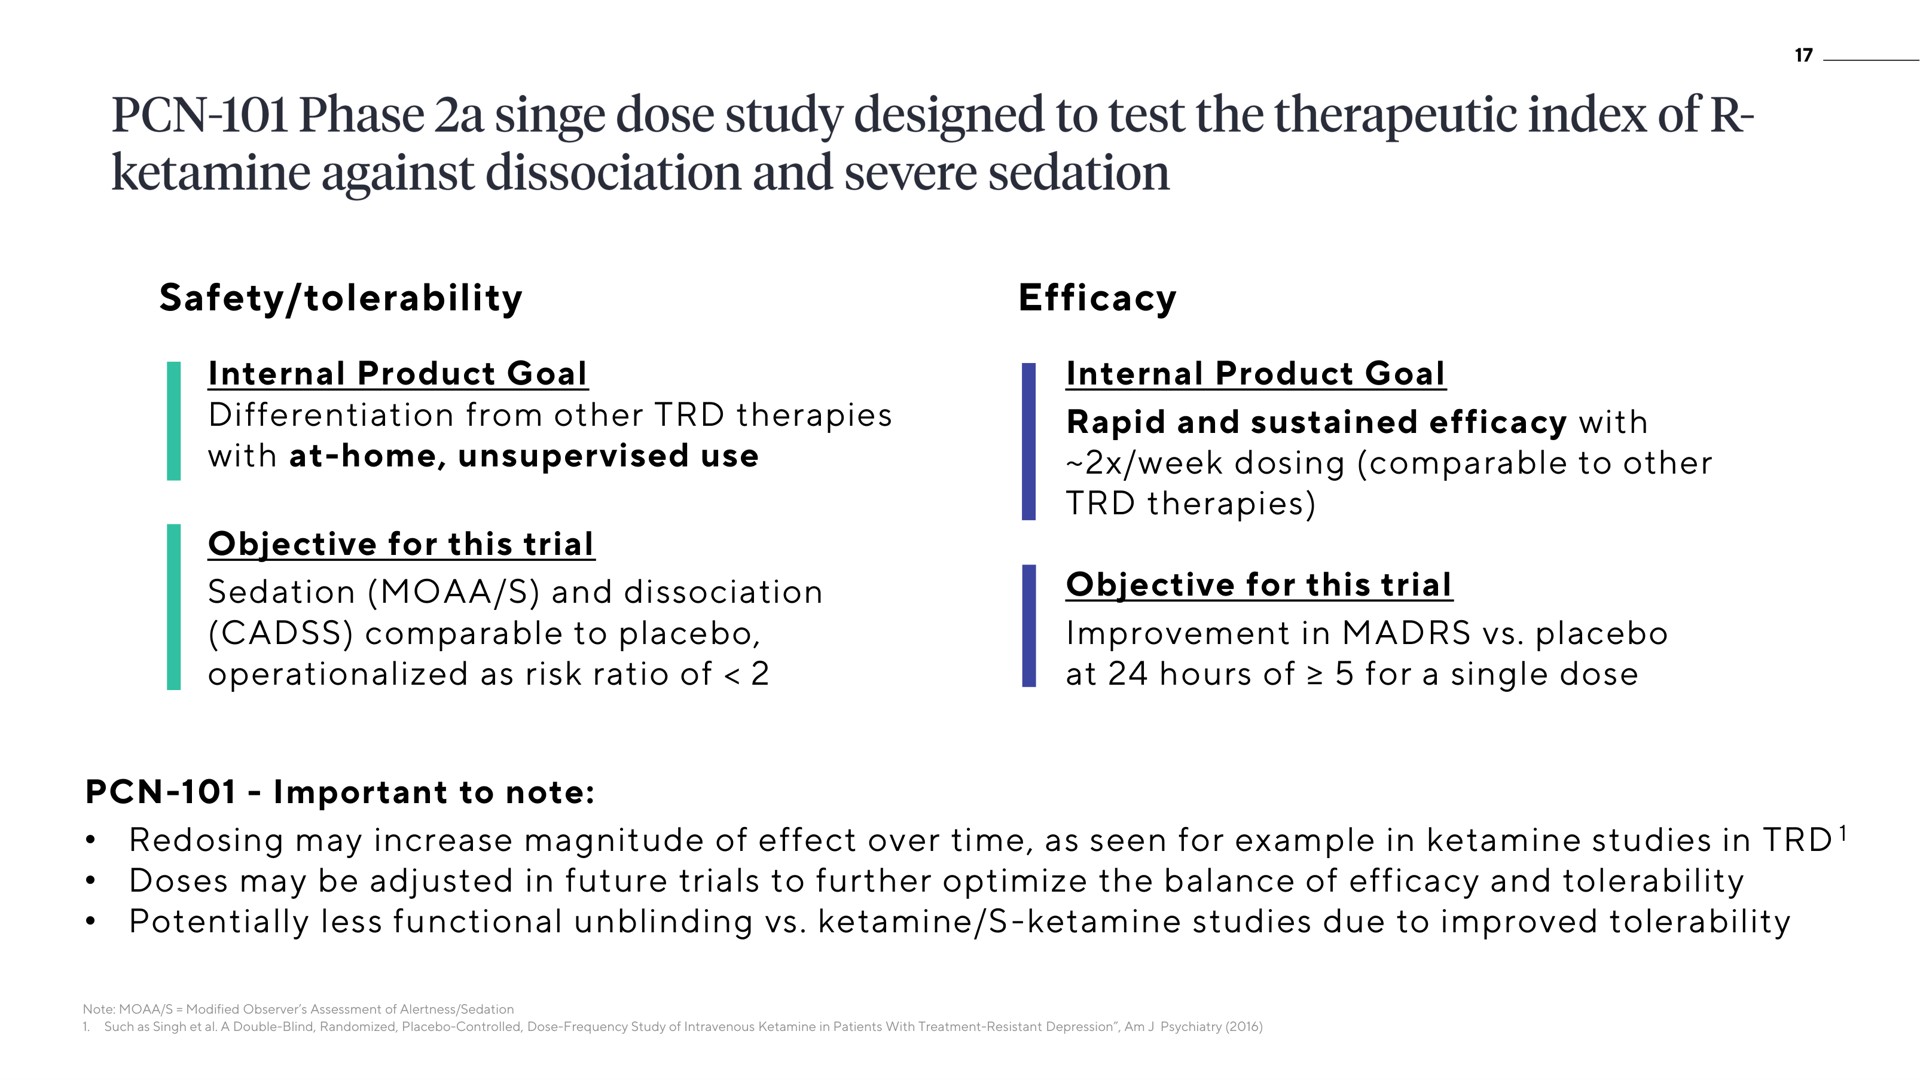 safety tolerability efficacy internal product goal differentiation from other therapies with at home unsupervised use objective for this trial sedation and dissociation cadss comparable to placebo as risk ratio of internal product goal rapid and sustained efficacy with week dosing comparable to other therapies objective for this trial improvement in placebo at hours of for a single dose important to note redosing may increase magnitude of effect over time as seen for example in studies in doses may be adjusted in future trials to further optimize the balance of efficacy and tolerability potentially less functional studies due to improved tolerability phase a singe study designed test therapeutic index against severe | ATAI